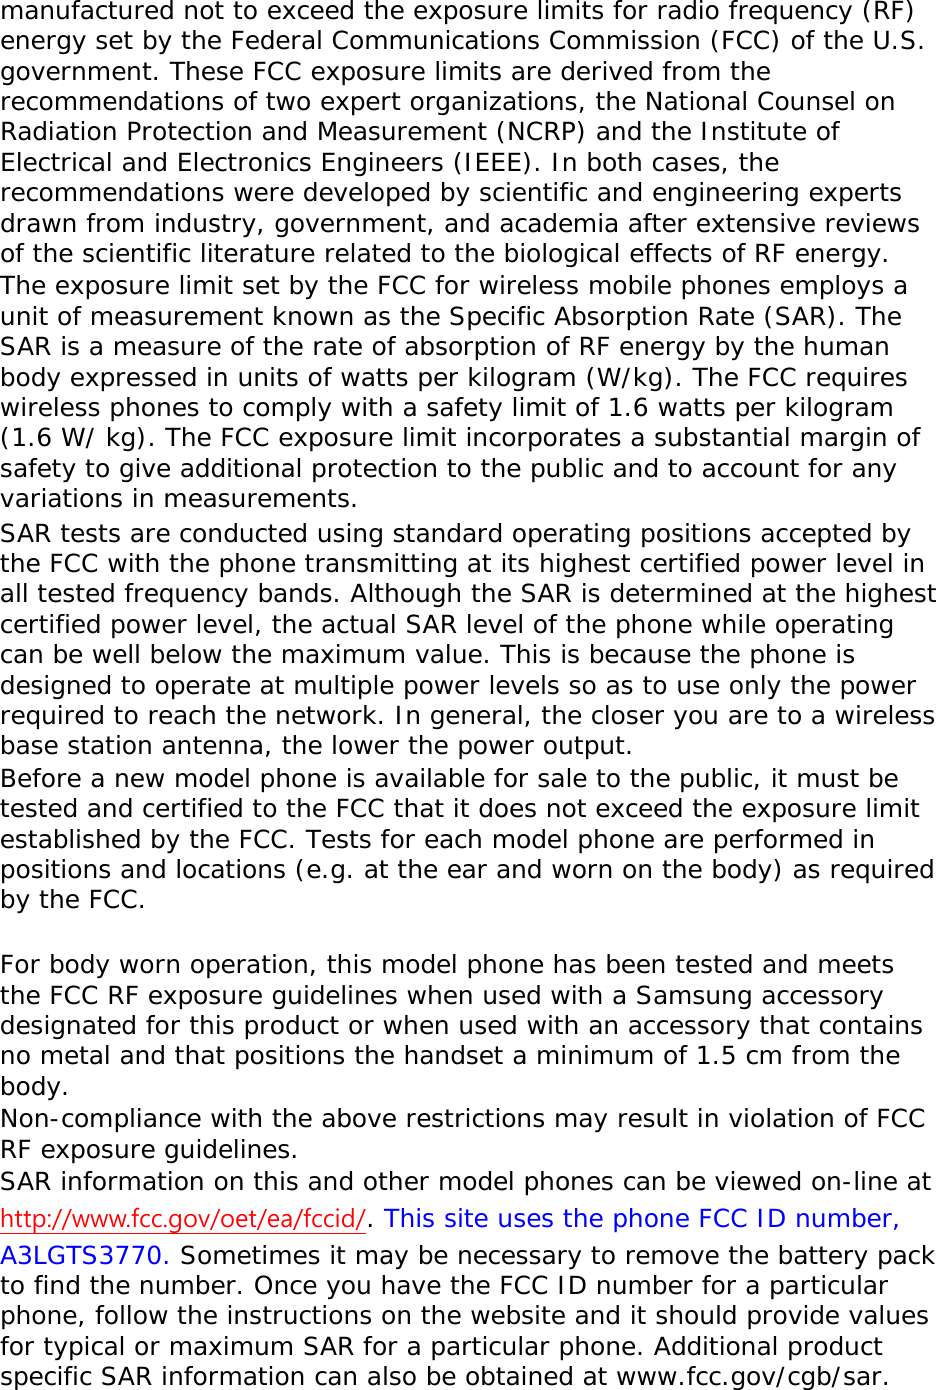 manufactured not to exceed the exposure limits for radio frequency (RF) energy set by the Federal Communications Commission (FCC) of the U.S. government. These FCC exposure limits are derived from the recommendations of two expert organizations, the National Counsel on Radiation Protection and Measurement (NCRP) and the Institute of Electrical and Electronics Engineers (IEEE). In both cases, the recommendations were developed by scientific and engineering experts drawn from industry, government, and academia after extensive reviews of the scientific literature related to the biological effects of RF energy. The exposure limit set by the FCC for wireless mobile phones employs a unit of measurement known as the Specific Absorption Rate (SAR). The SAR is a measure of the rate of absorption of RF energy by the human body expressed in units of watts per kilogram (W/kg). The FCC requires wireless phones to comply with a safety limit of 1.6 watts per kilogram (1.6 W/ kg). The FCC exposure limit incorporates a substantial margin of safety to give additional protection to the public and to account for any variations in measurements. SAR tests are conducted using standard operating positions accepted by the FCC with the phone transmitting at its highest certified power level in all tested frequency bands. Although the SAR is determined at the highest certified power level, the actual SAR level of the phone while operating can be well below the maximum value. This is because the phone is designed to operate at multiple power levels so as to use only the power required to reach the network. In general, the closer you are to a wireless base station antenna, the lower the power output. Before a new model phone is available for sale to the public, it must be tested and certified to the FCC that it does not exceed the exposure limit established by the FCC. Tests for each model phone are performed in positions and locations (e.g. at the ear and worn on the body) as required by the FCC.    For body worn operation, this model phone has been tested and meets the FCC RF exposure guidelines when used with a Samsung accessory designated for this product or when used with an accessory that contains no metal and that positions the handset a minimum of 1.5 cm from the body.  Non-compliance with the above restrictions may result in violation of FCC RF exposure guidelines. SAR information on this and other model phones can be viewed on-line at http://www.fcc.gov/oet/ea/fccid/. This site uses the phone FCC ID number, A3LGTS3770. Sometimes it may be necessary to remove the battery pack to find the number. Once you have the FCC ID number for a particular phone, follow the instructions on the website and it should provide values for typical or maximum SAR for a particular phone. Additional product specific SAR information can also be obtained at www.fcc.gov/cgb/sar. 